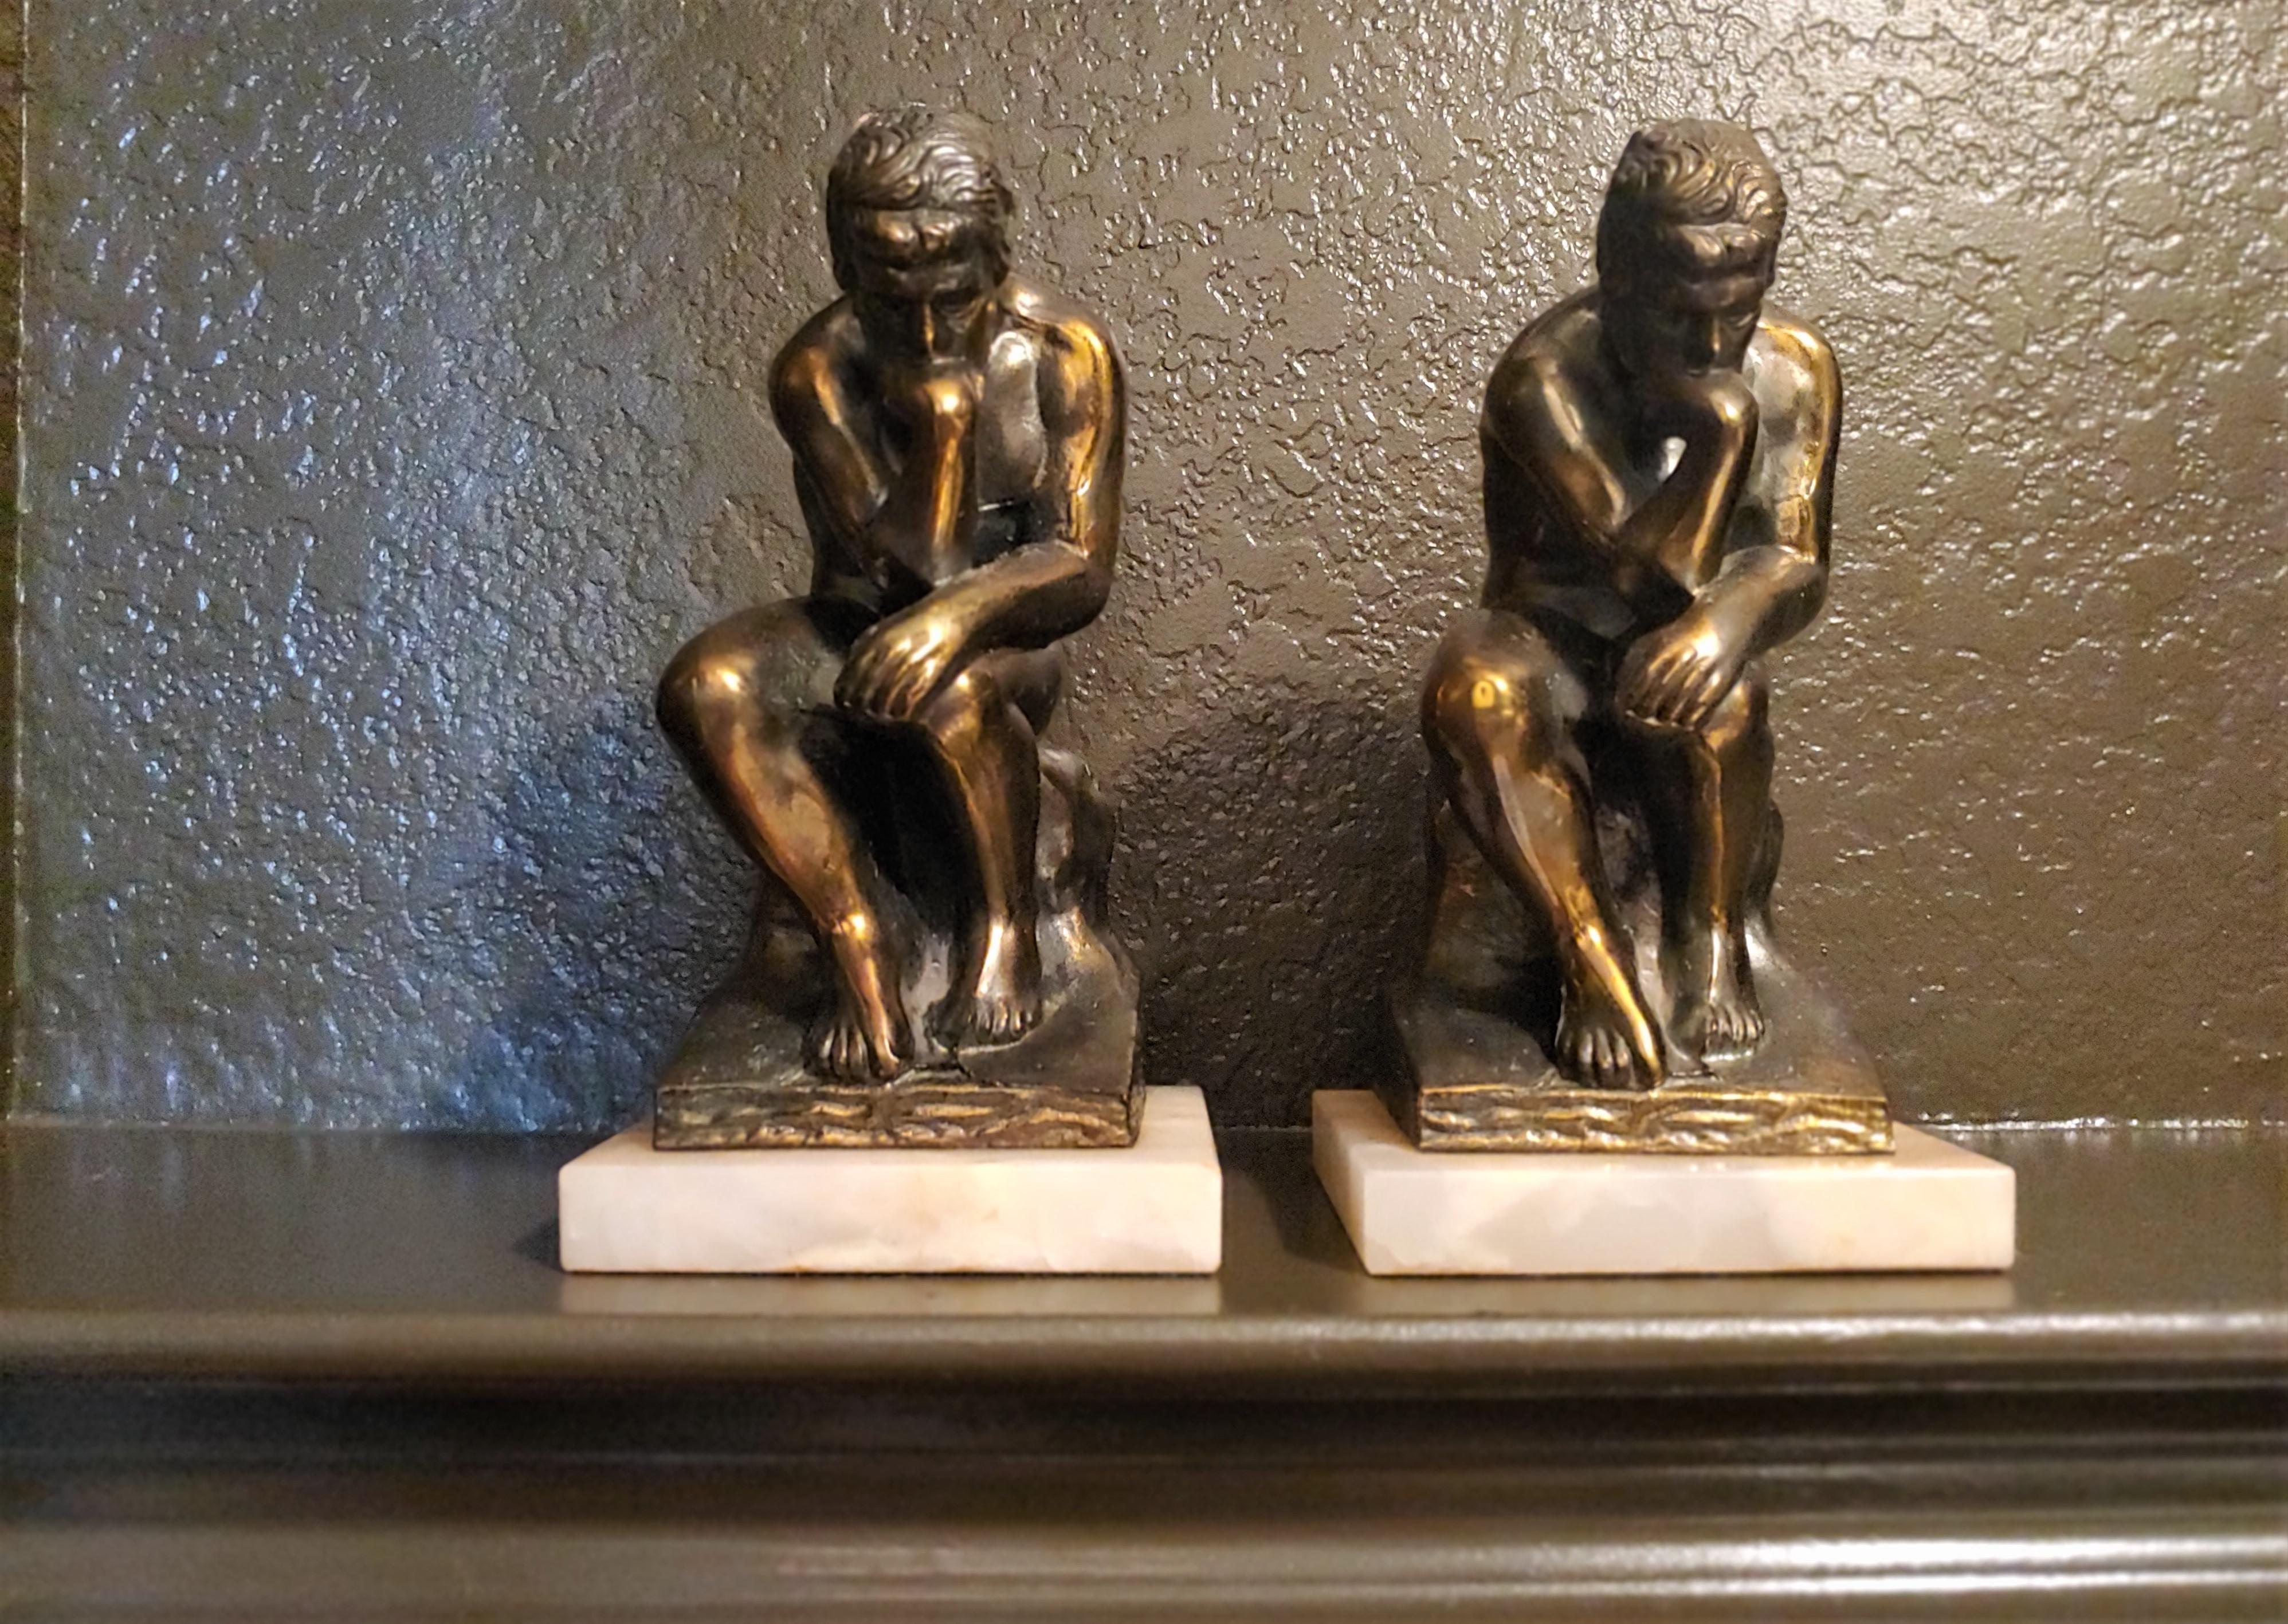 This pair of vintage brass and white onyx bookends dates to the 1920s and are clearly inspired by Rodin's 'The Thinker.' From time to time, similar bookends will surface, but differing significantly in craftsmanship. This pair is stunning and rare